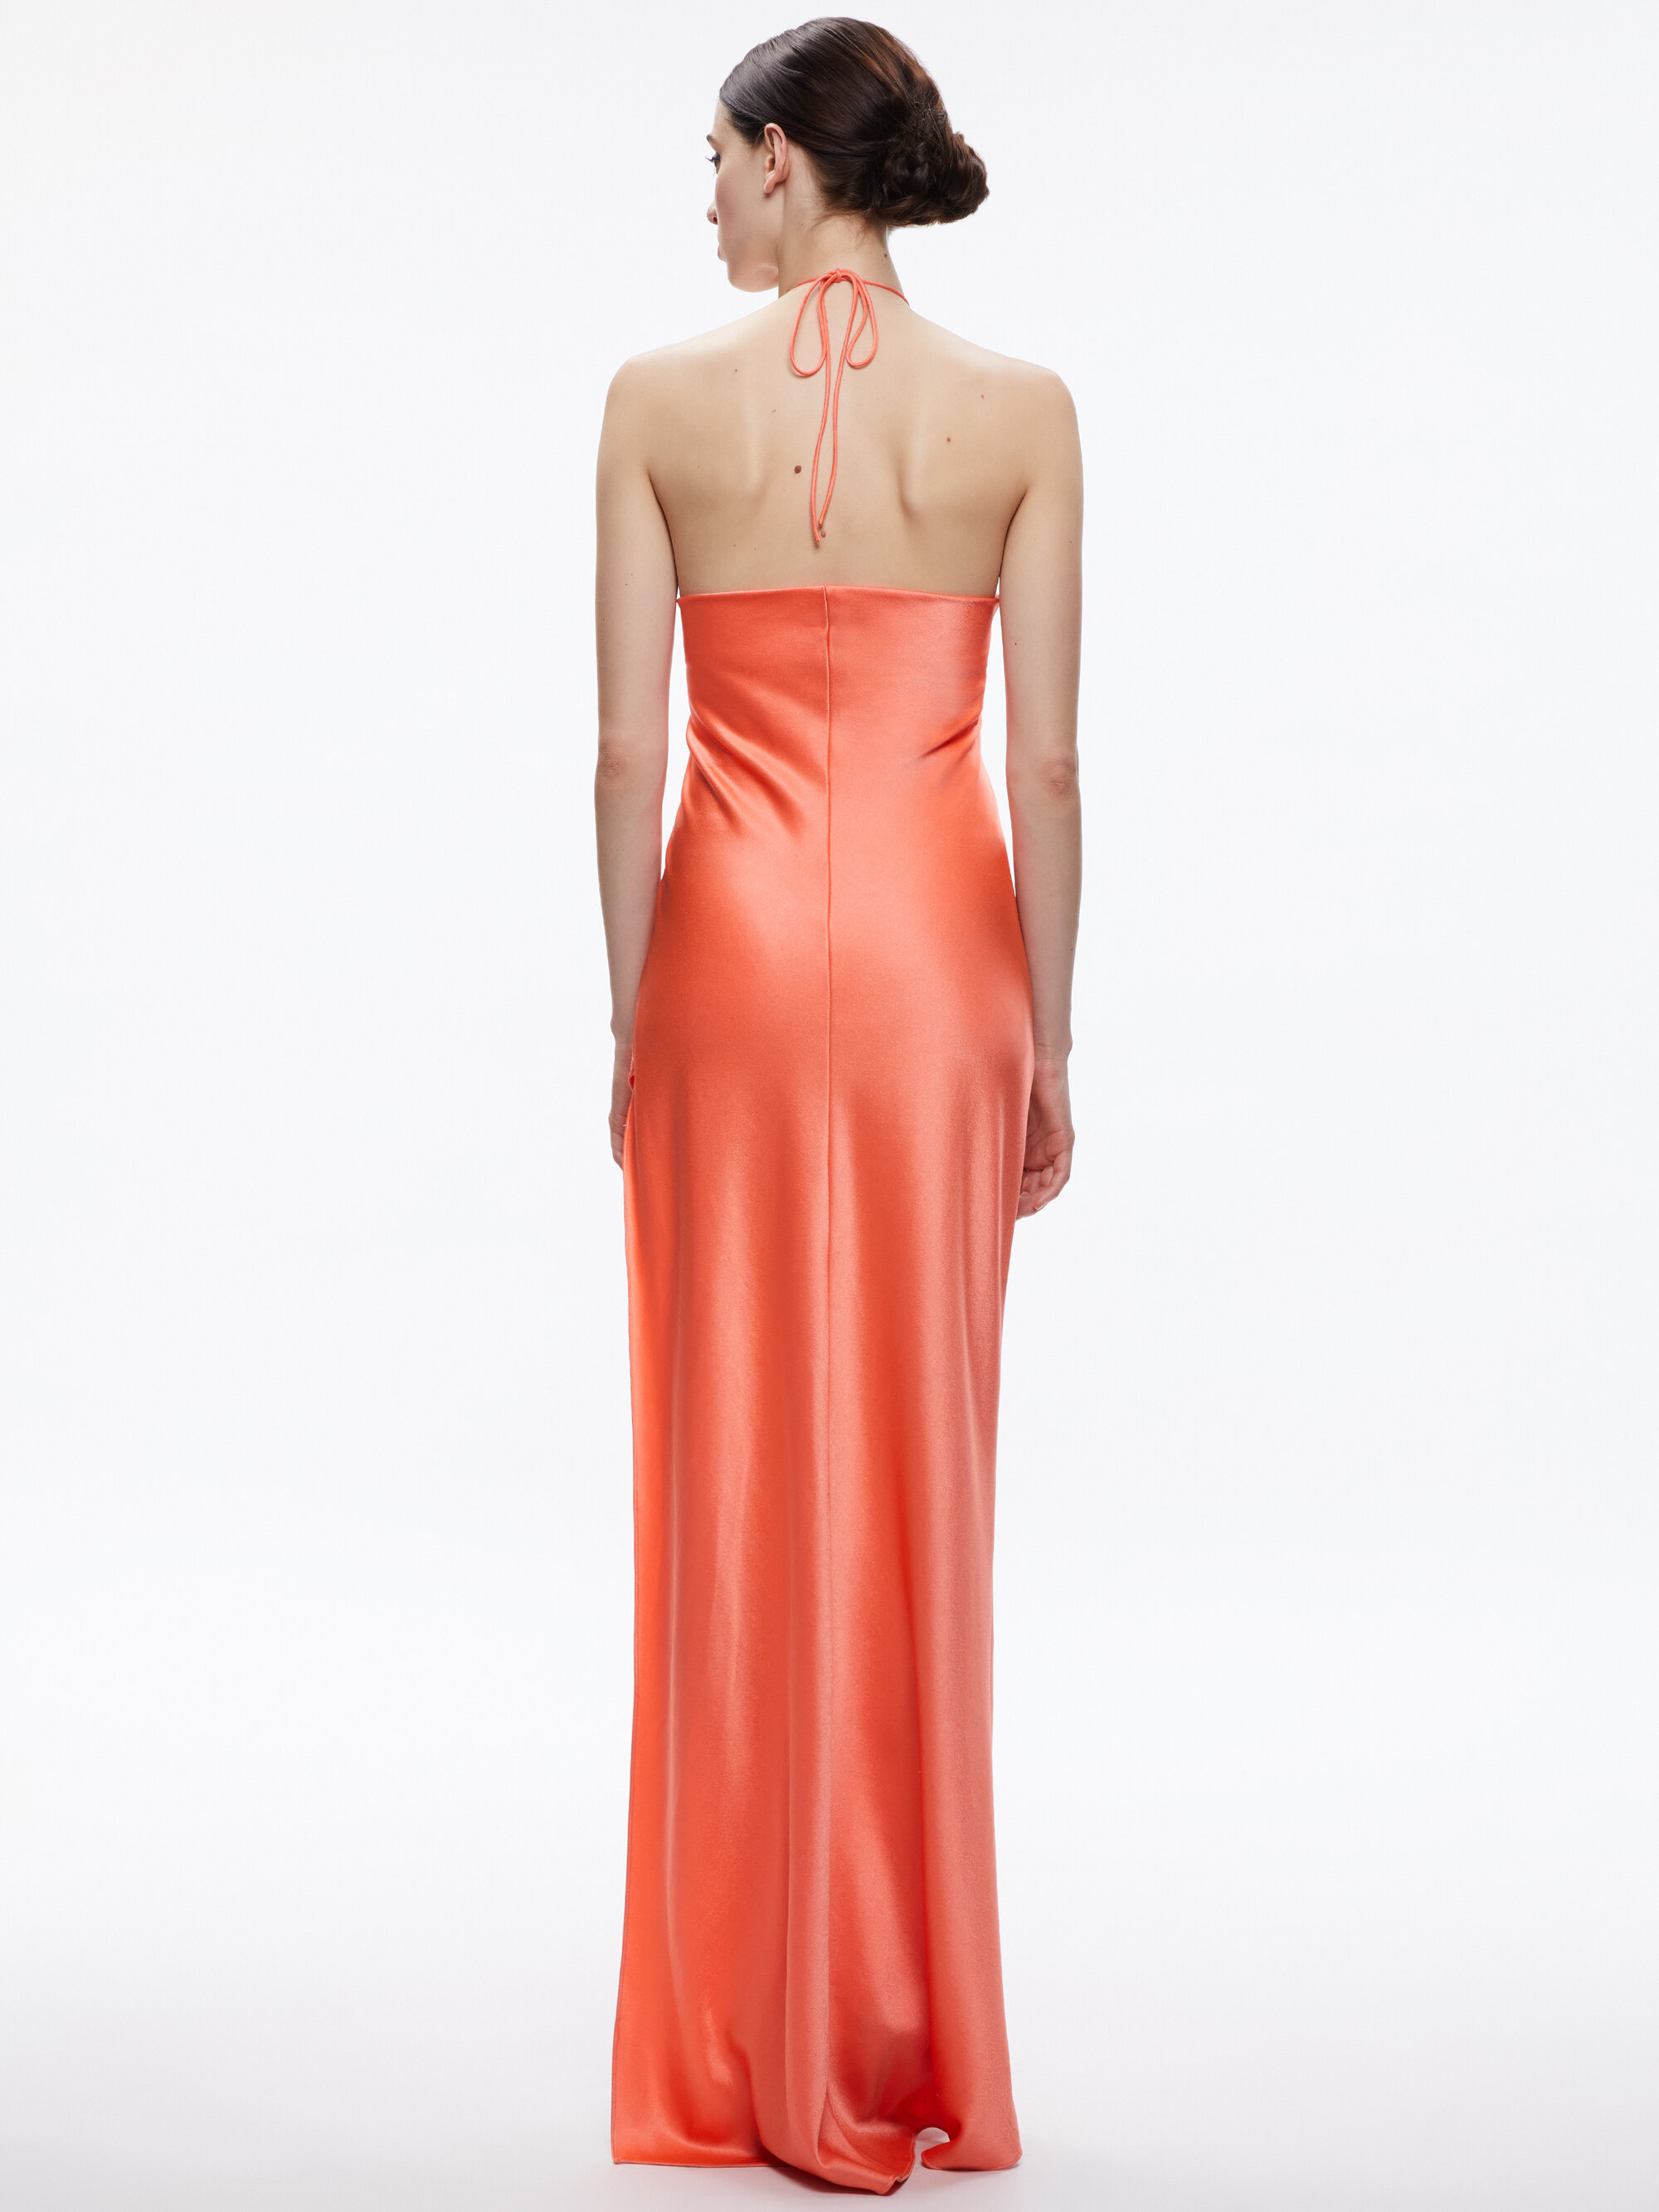 ZUMI OPEN BACK HALTER MAXI DRESS - CORAL SUNSET - Alice And Olivia